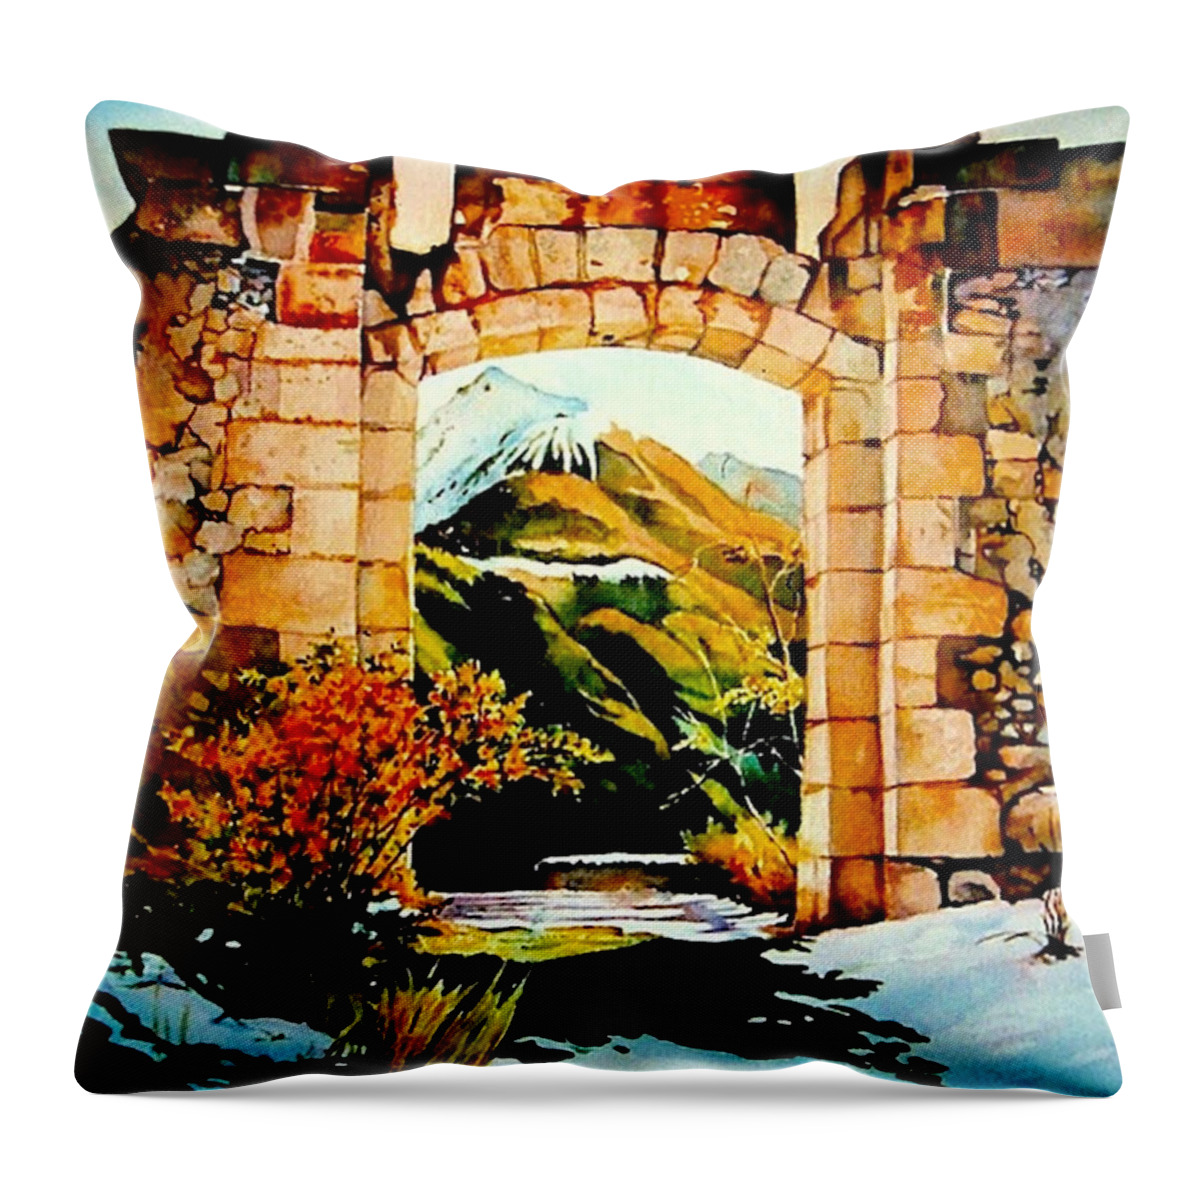 Aquarelle Throw Pillow featuring the painting Briancon - Fort des Tetes by Francoise Chauray